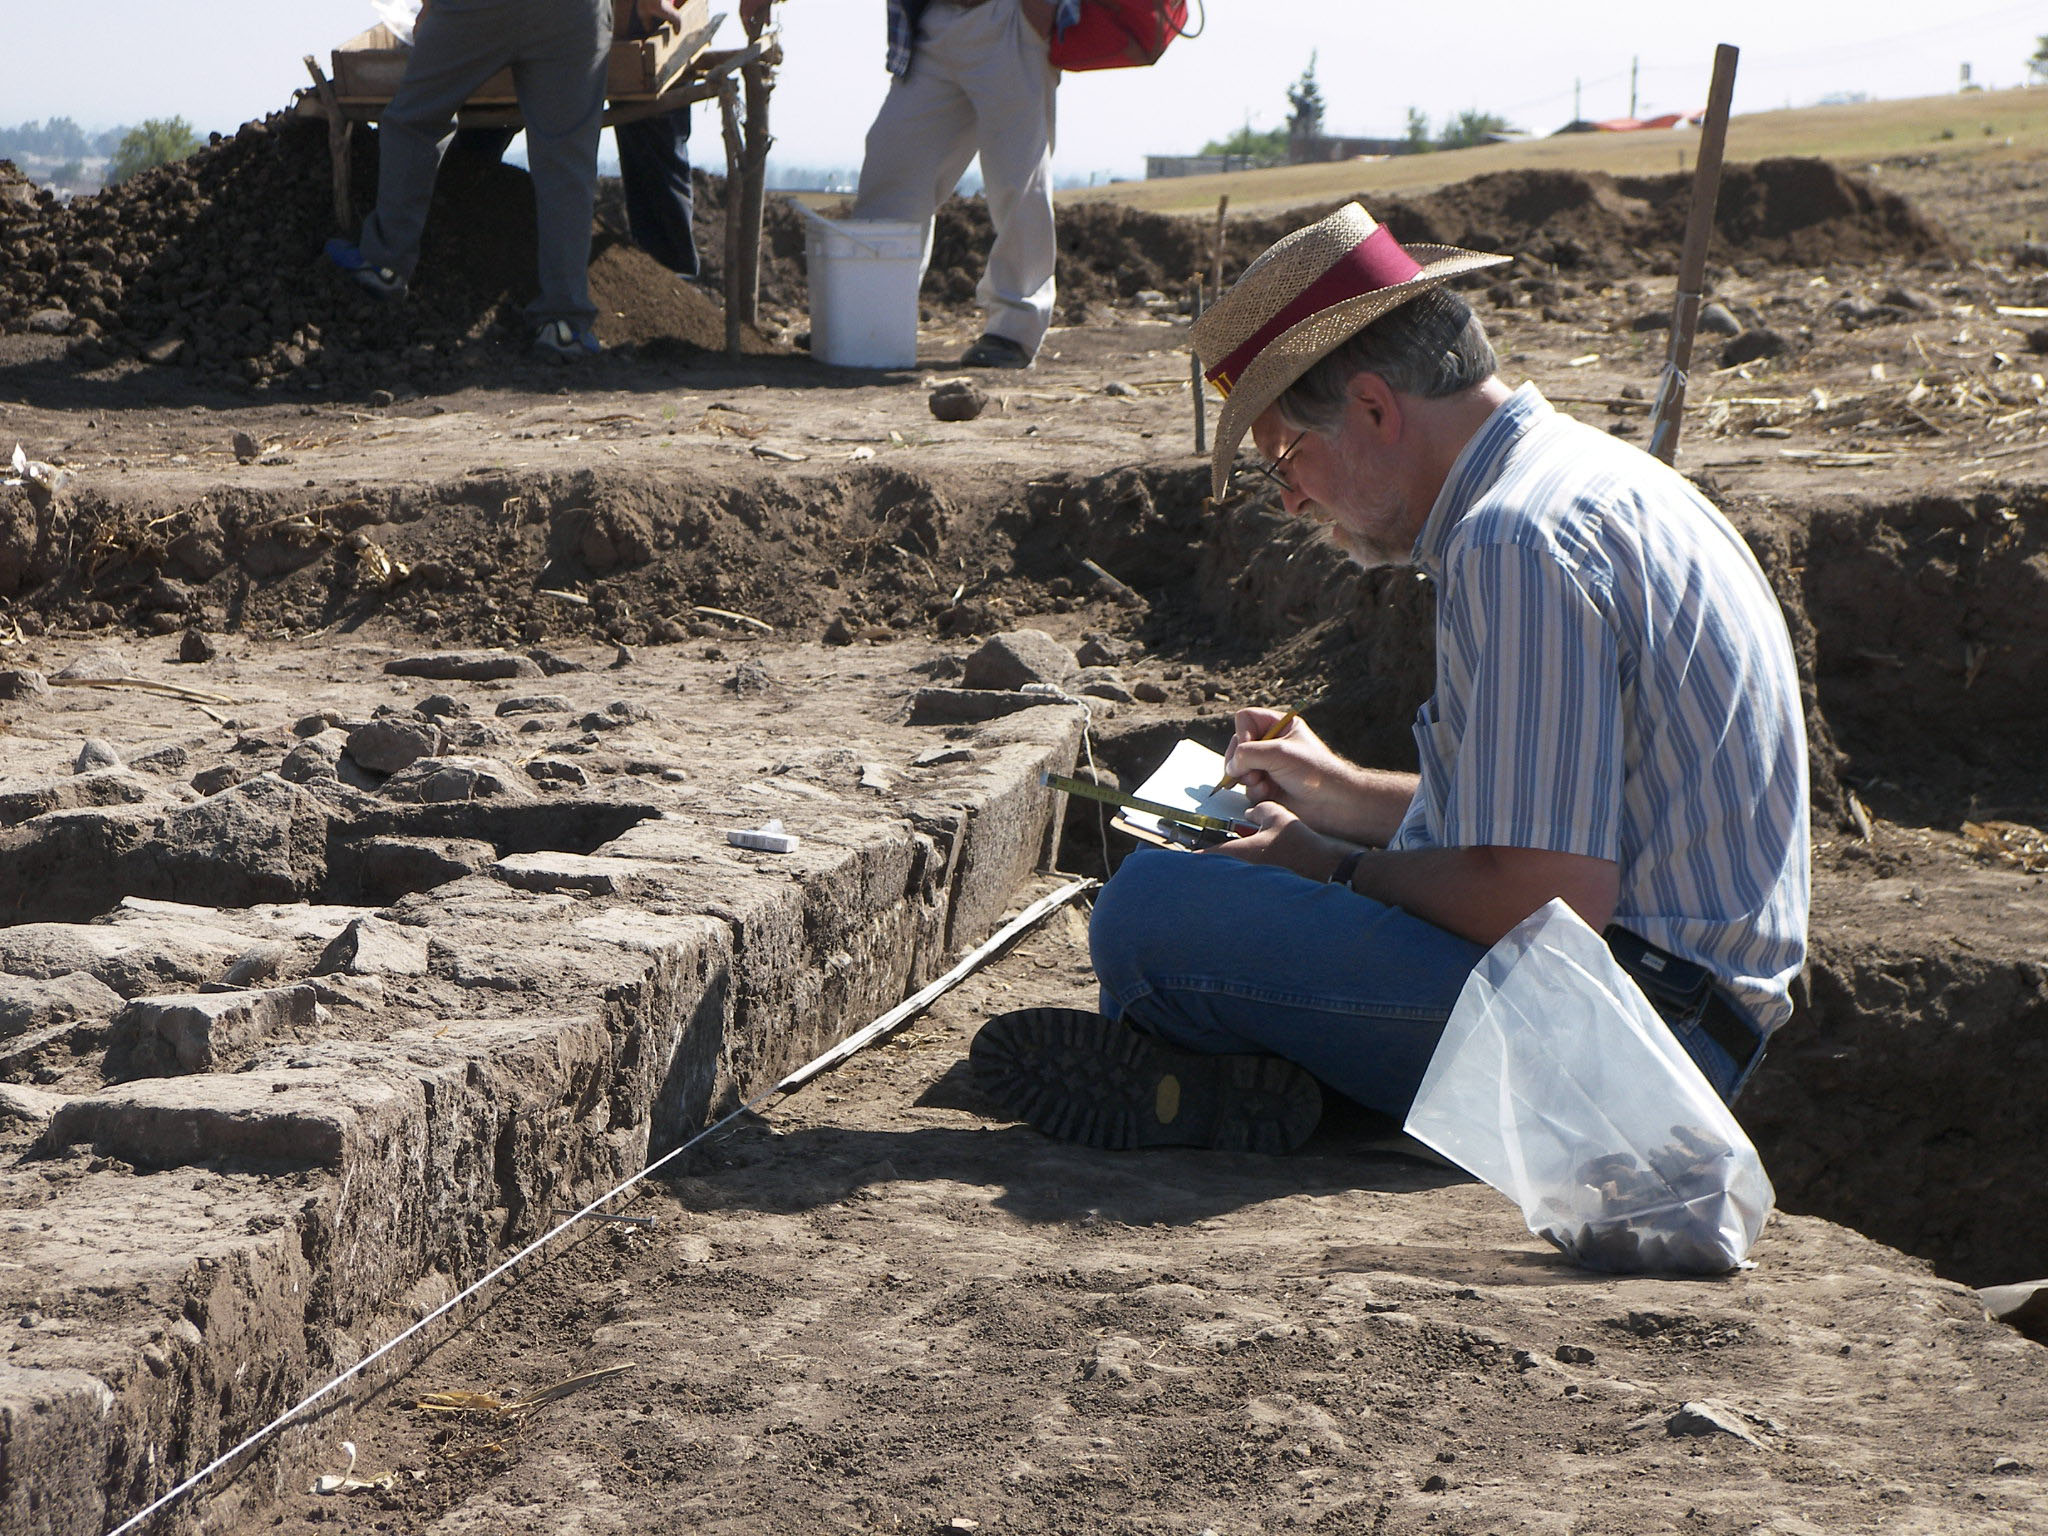 Archaeology expands beyond traditional scope into other sciences | ASU News